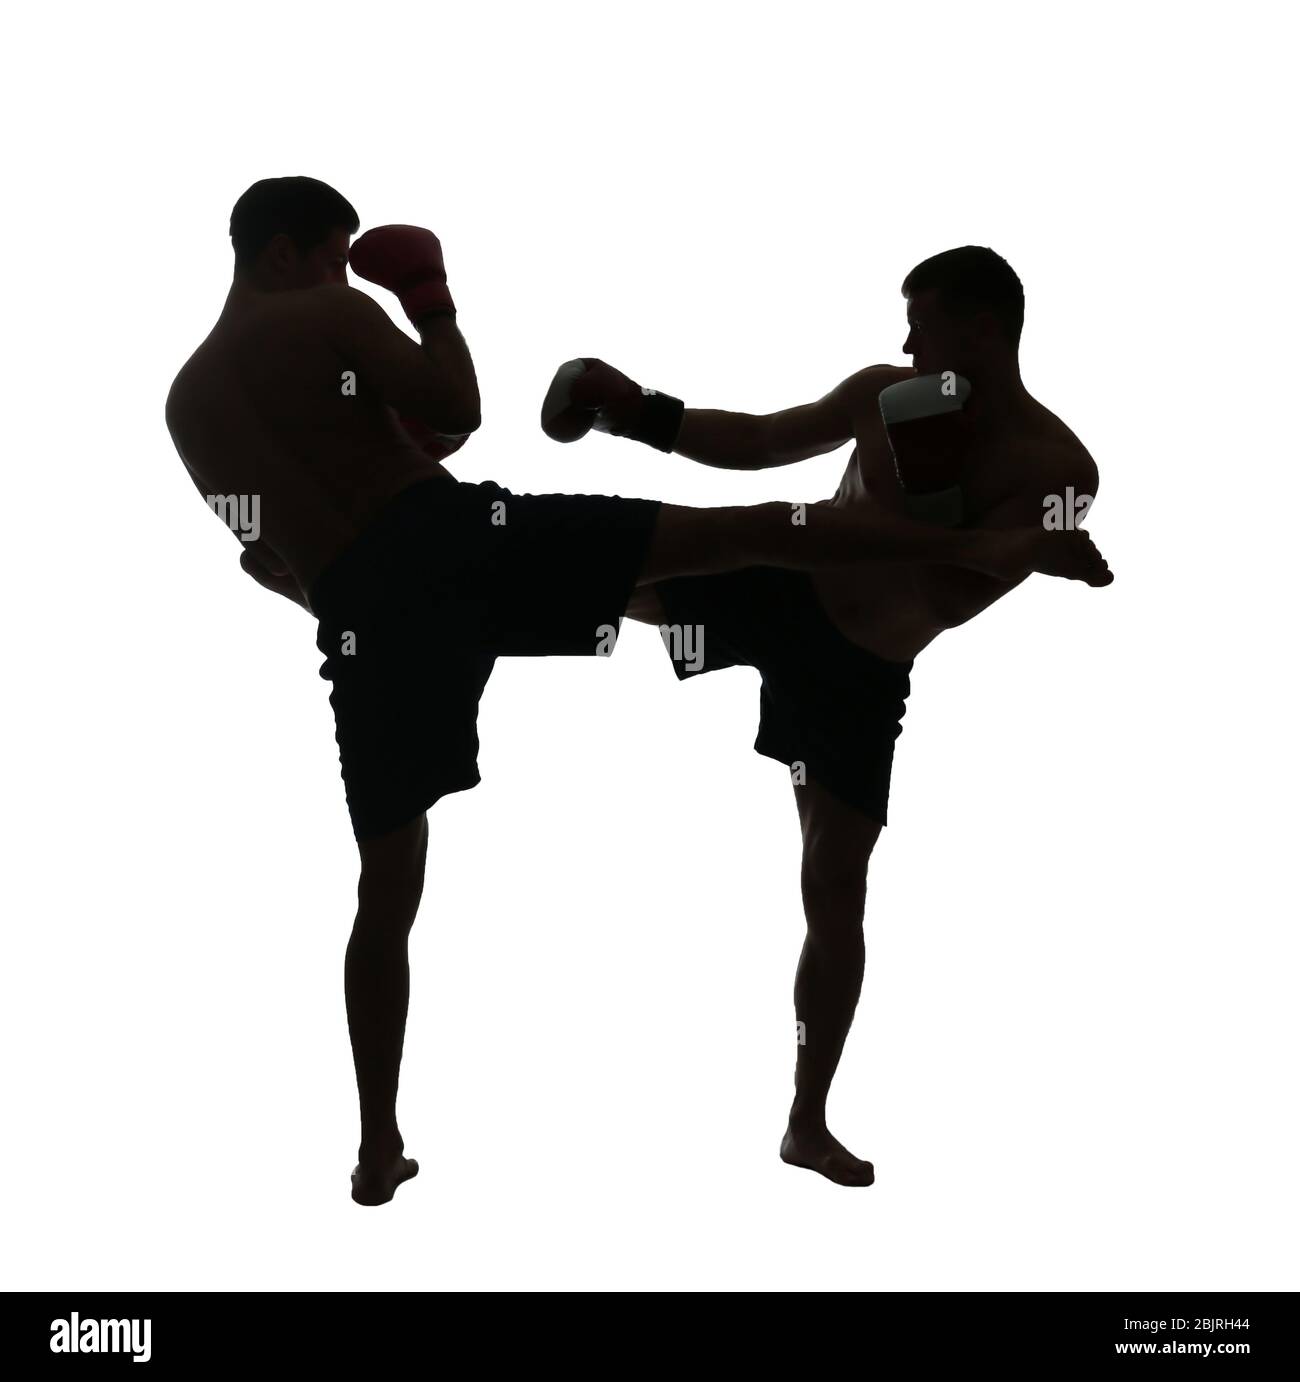 Silhouette of male boxers fighting on white background Stock Photo